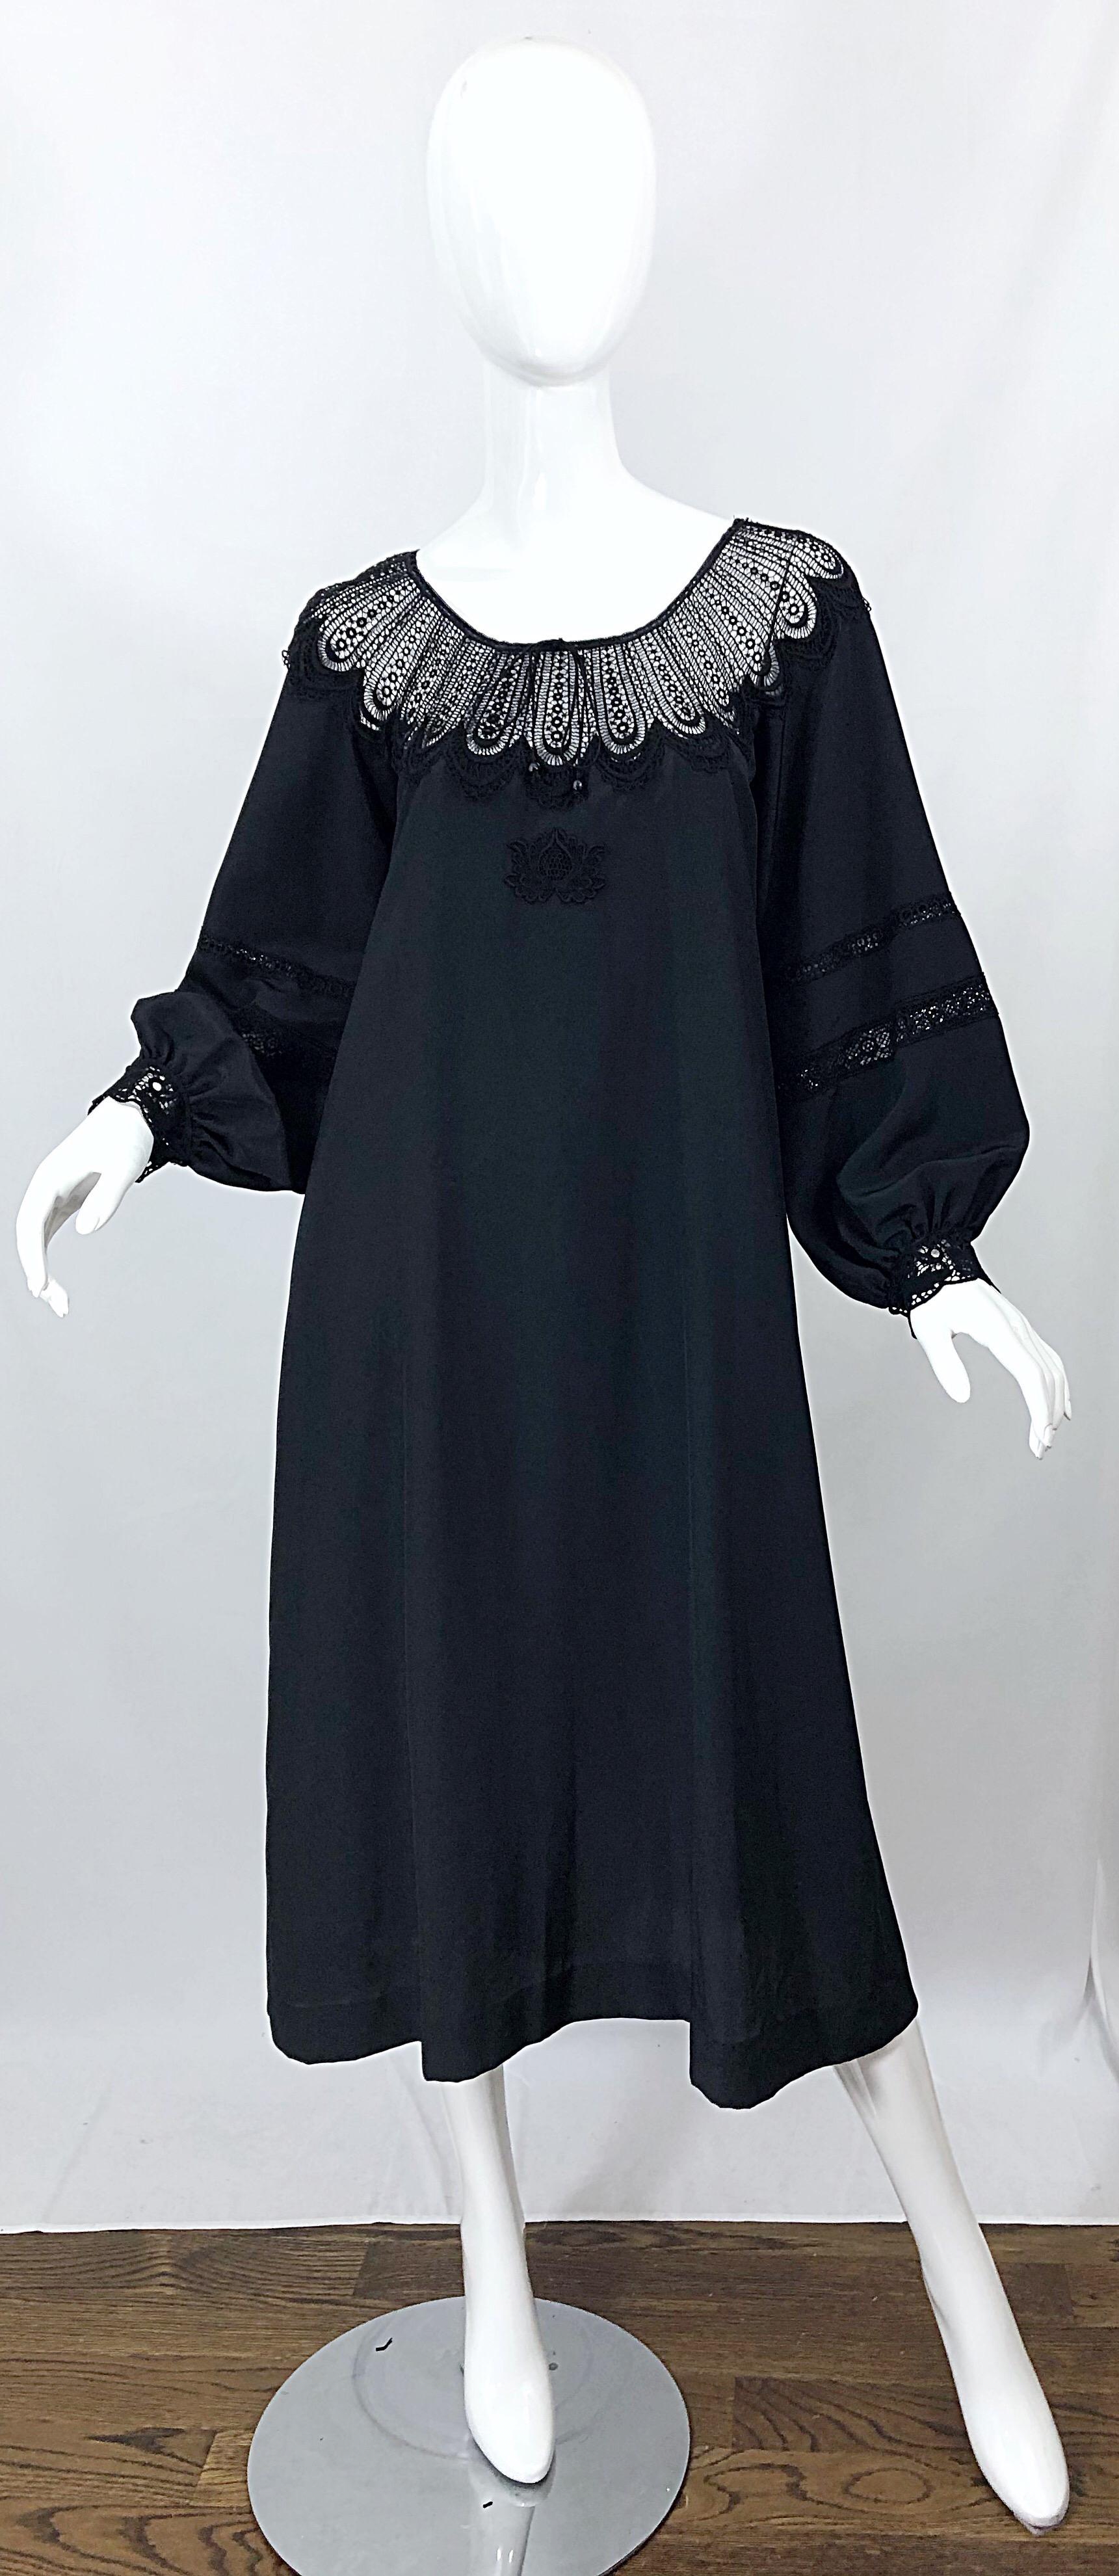 Chic 70s GIORGIO DI SANT ANGELO black crochet bishop sleeve smock dress! Features cut-out crochet detail at neck and mid arm. Adjustable ties at center front neck. Simply slips over the head. Great belted or alone. The pictured vintage Paloma